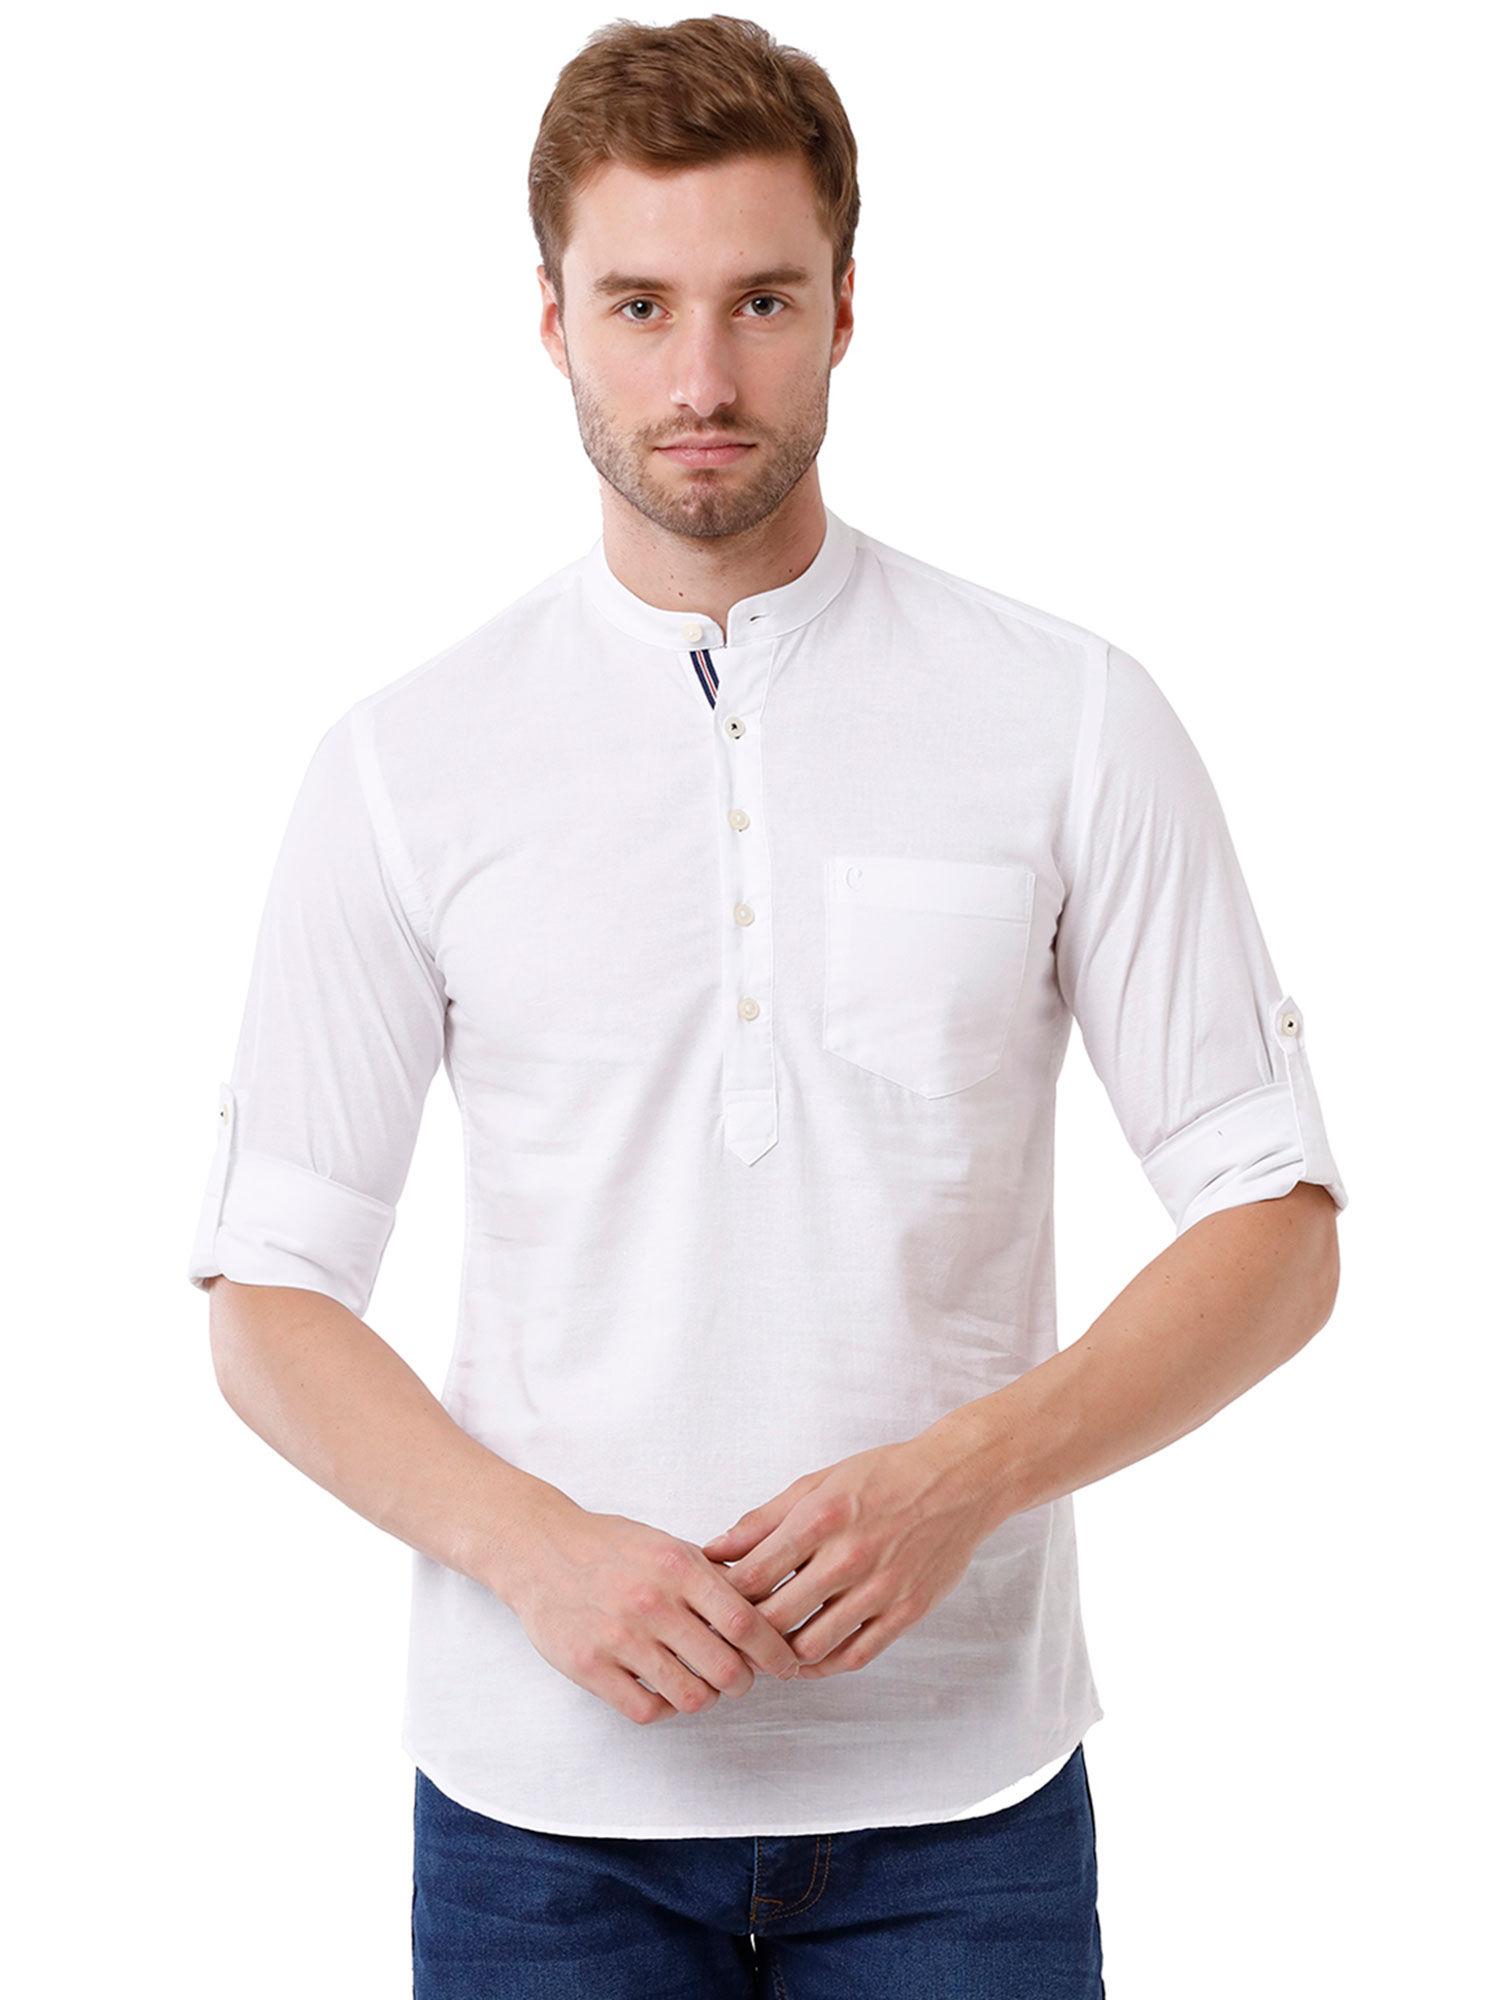 men's-cotton-linen-white-solid-slim-fit-full-sleeve-casual-shirt